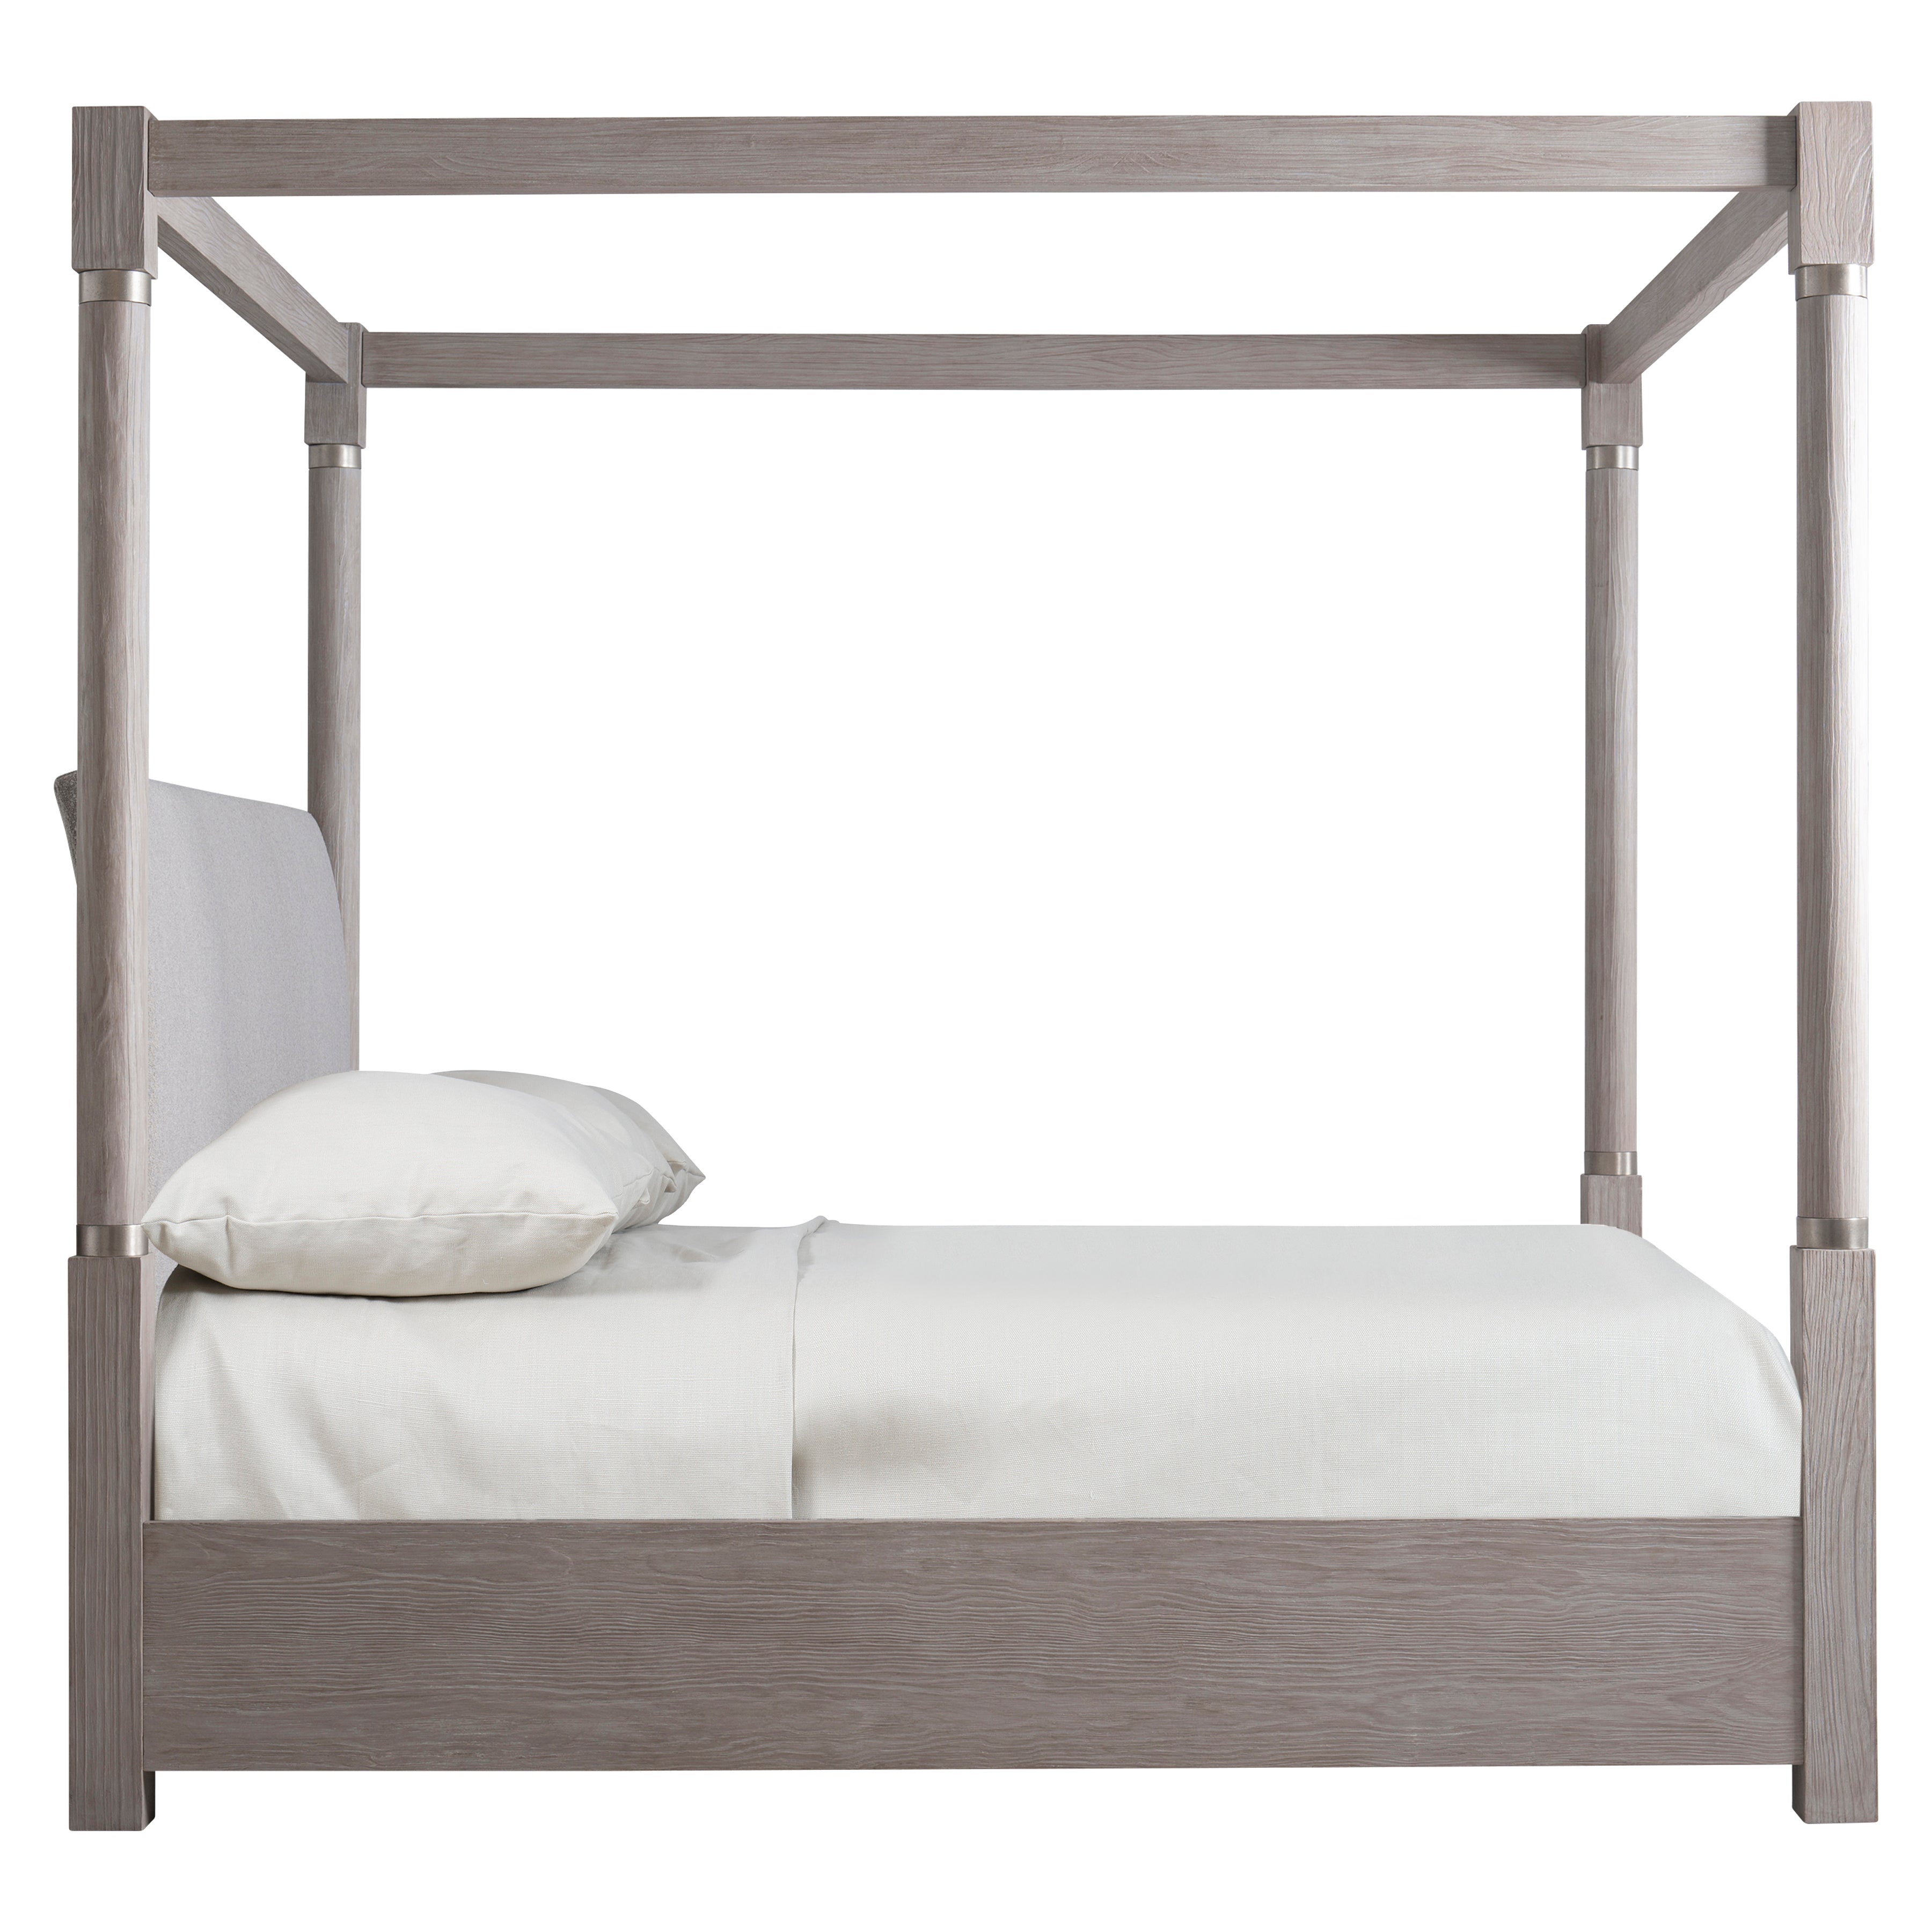 Trianon Upholstered California King Canopy Bed